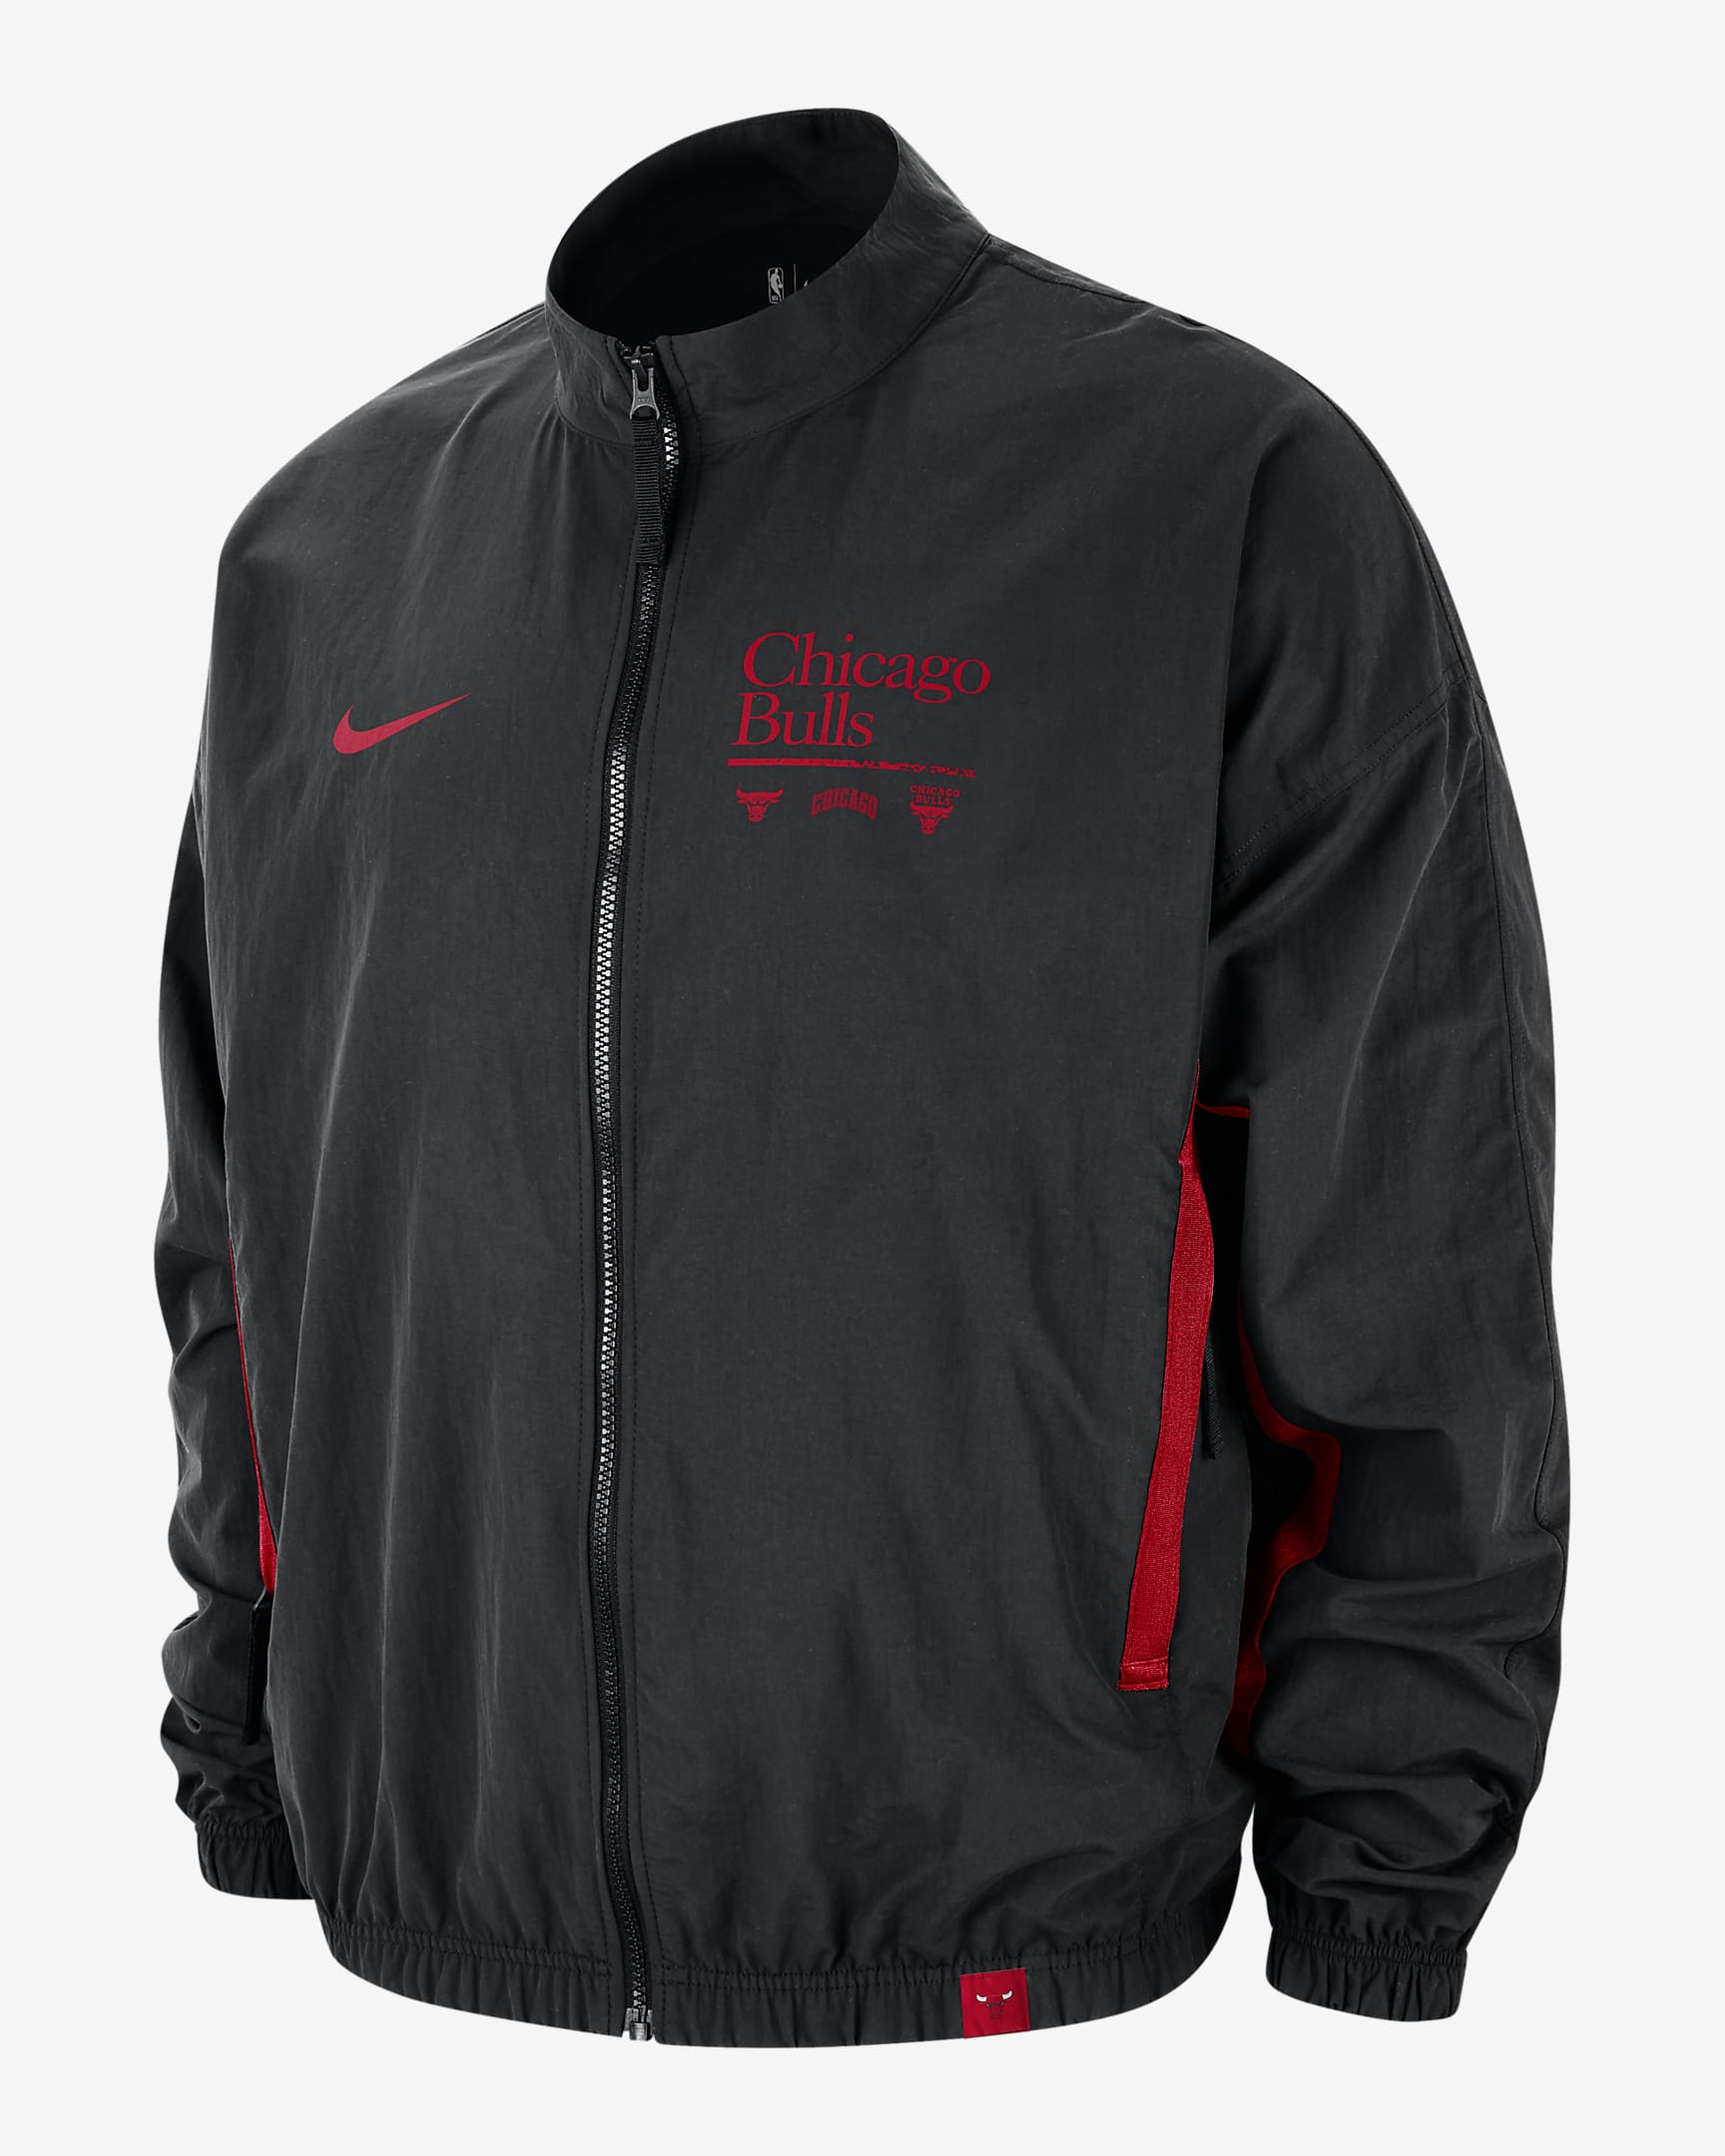 Chicago Bulls DNA Courtside Men's Nike NBA Woven Graphic Jacket. Nike AT